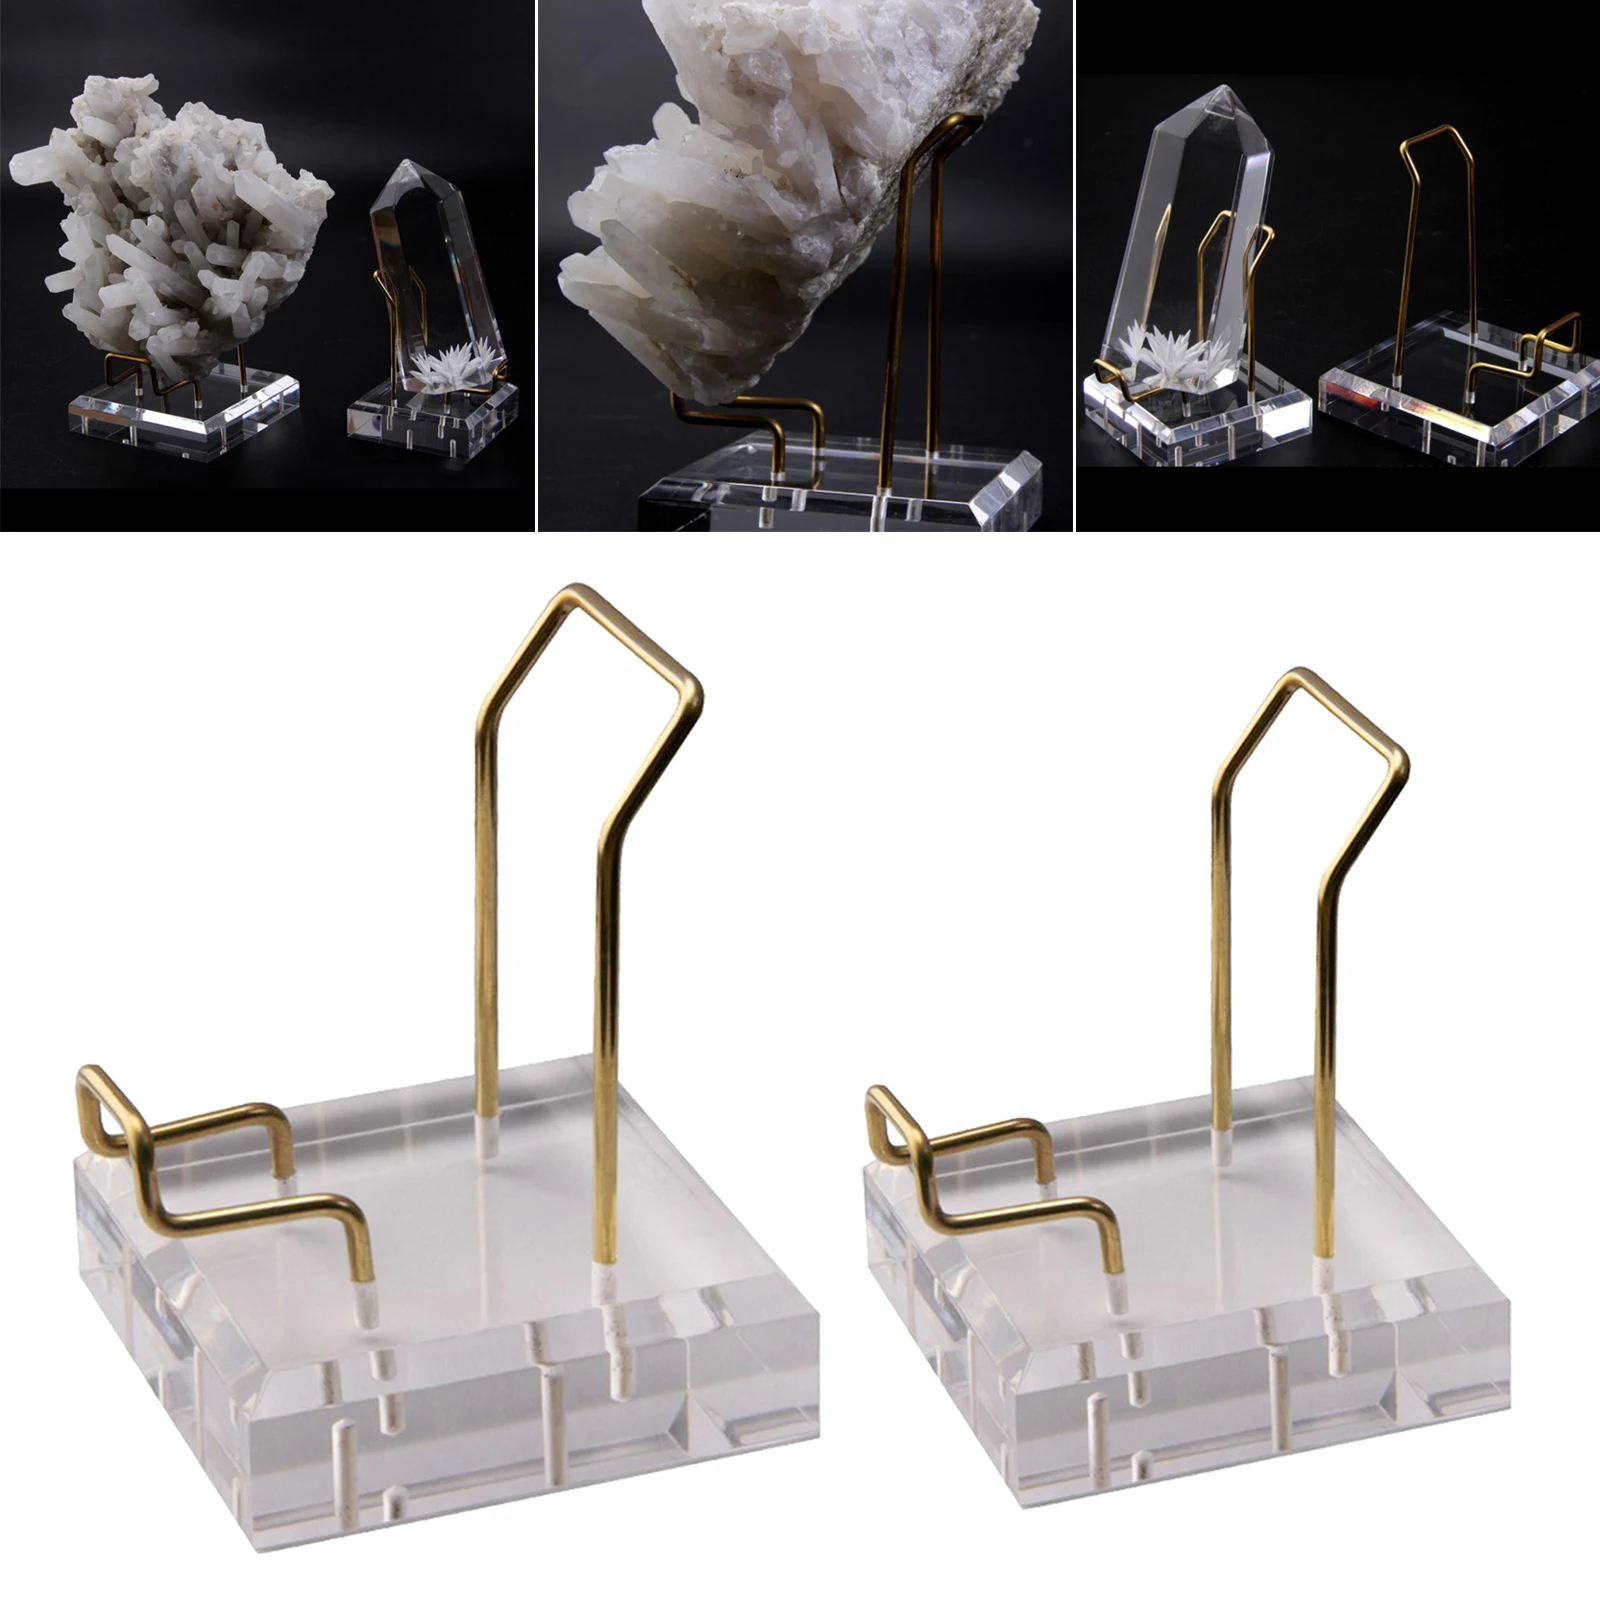 1pc Display Stand Mineral Specimens Fossil Crystal Ball Seashells Holder